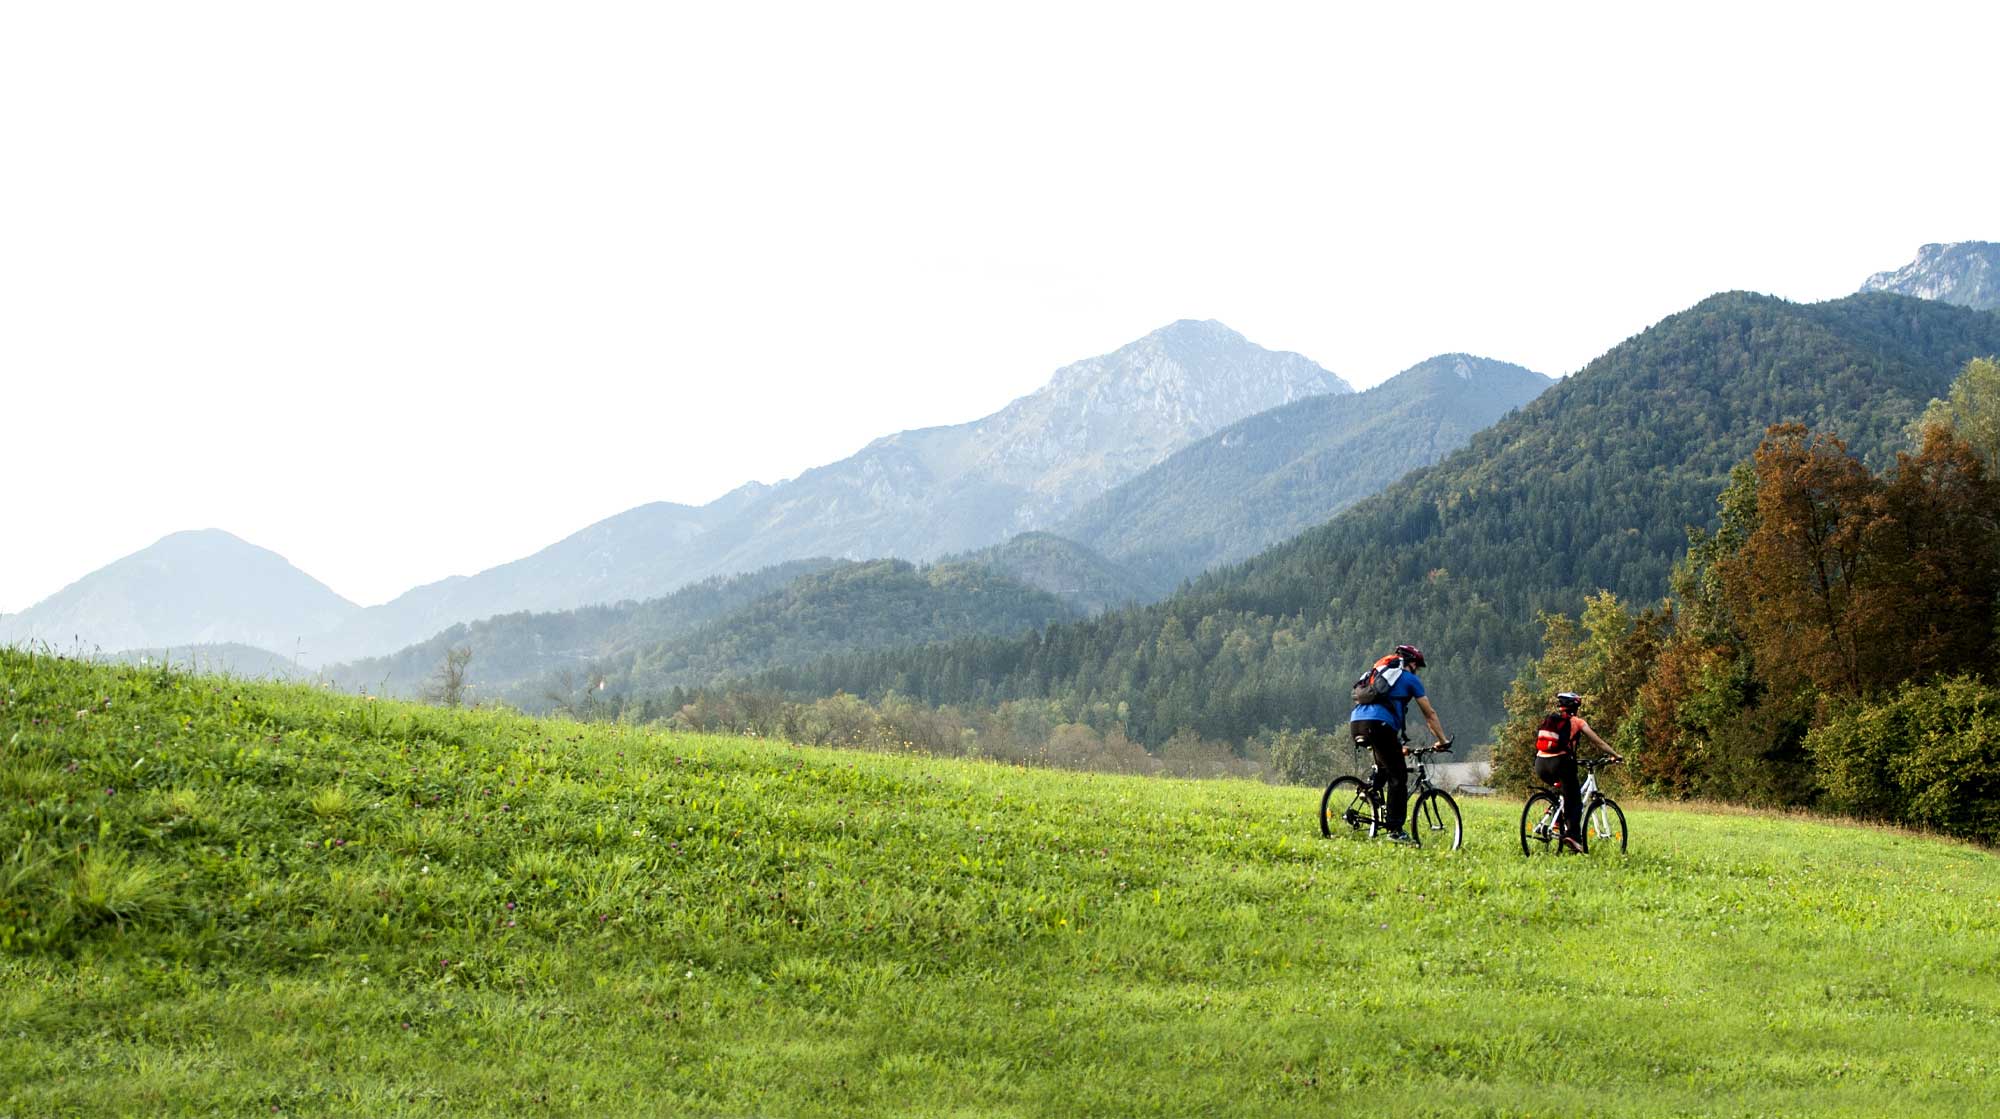 two people riding bikes through a grassy valley